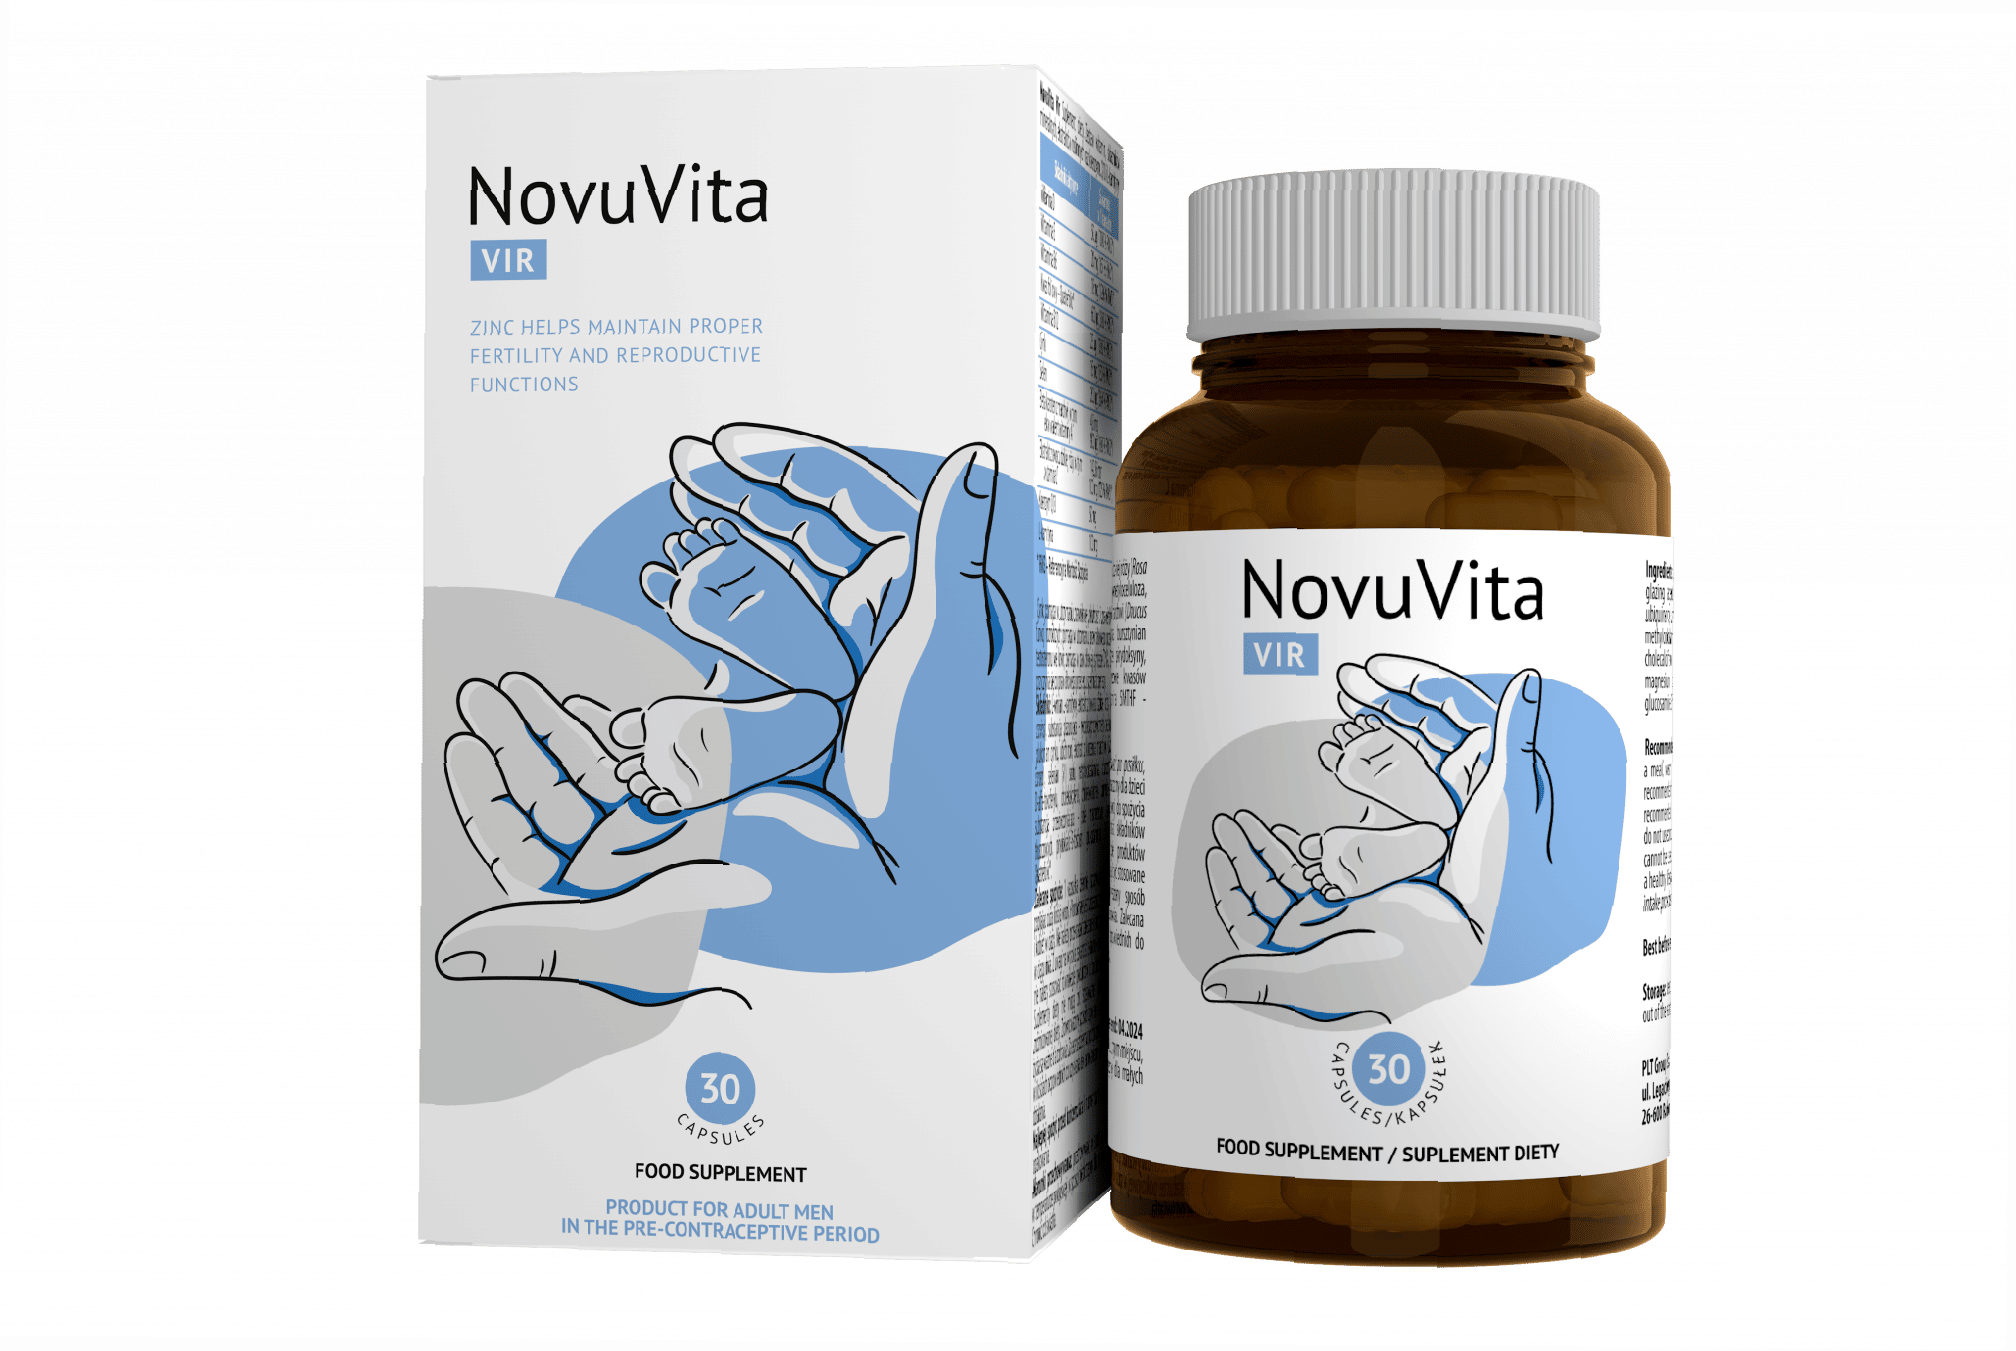 NovuVita Vir - What is it? What kind of product